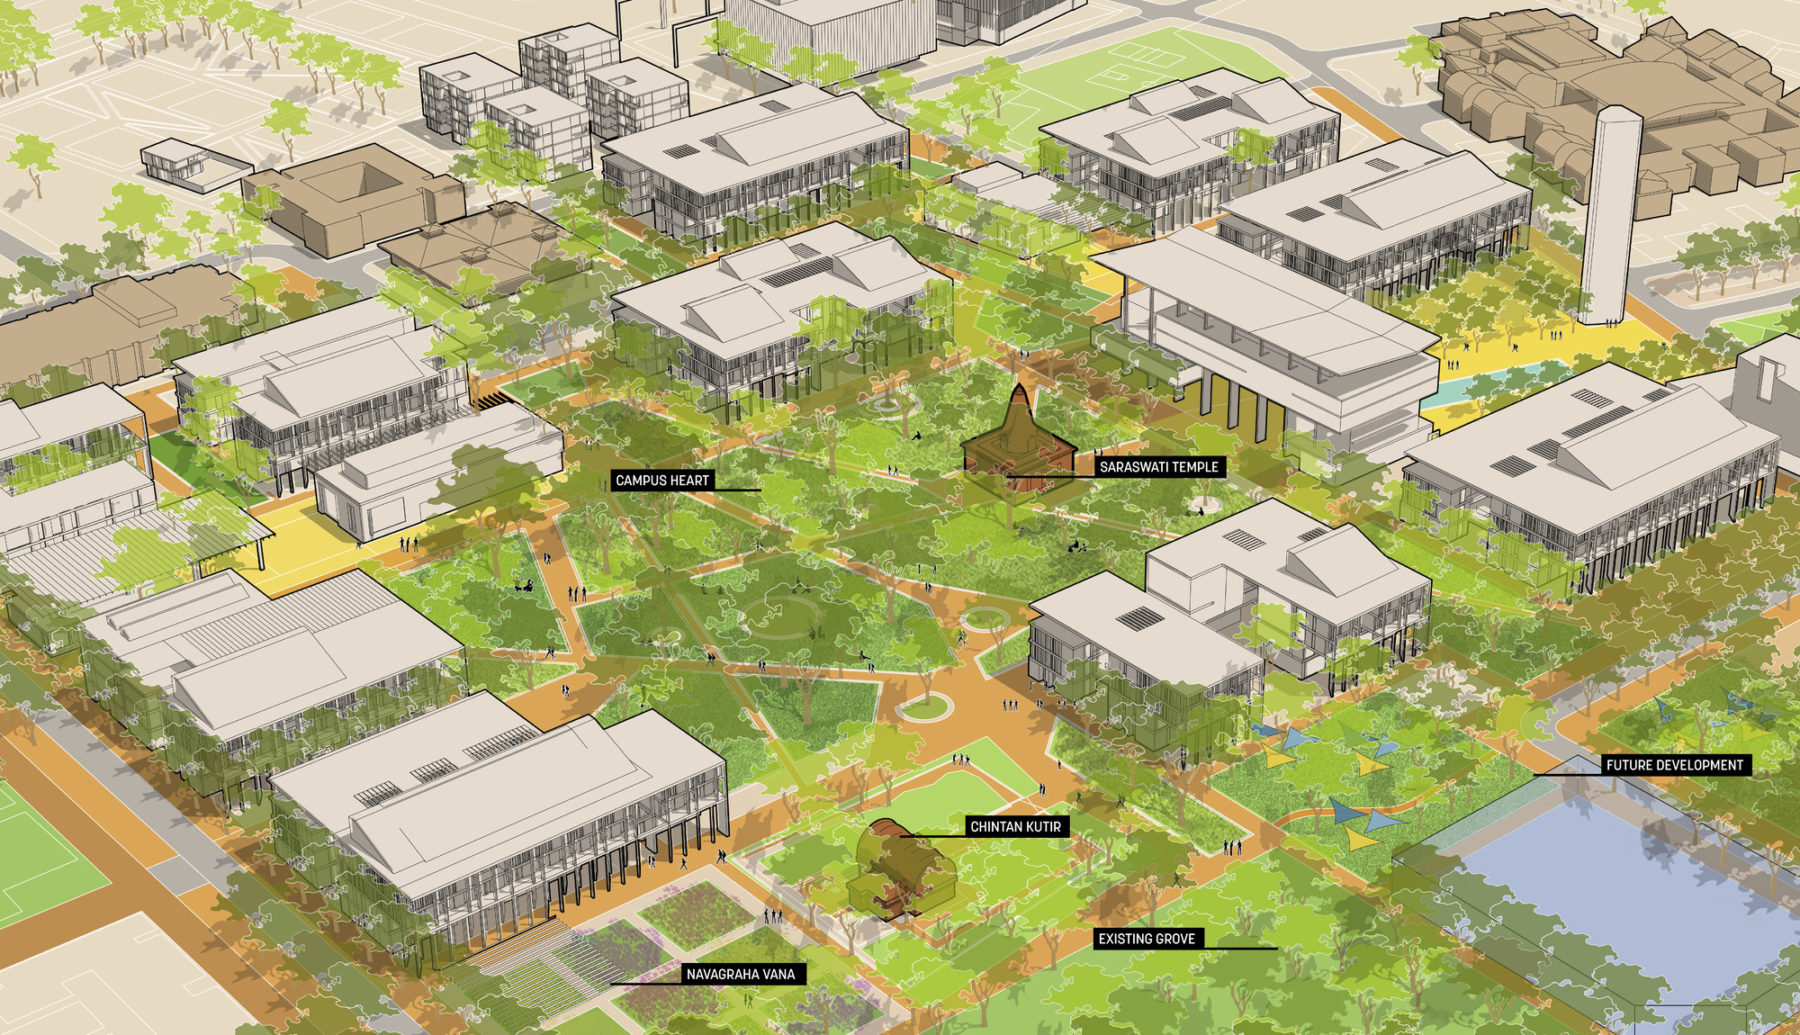 Section of campus plan